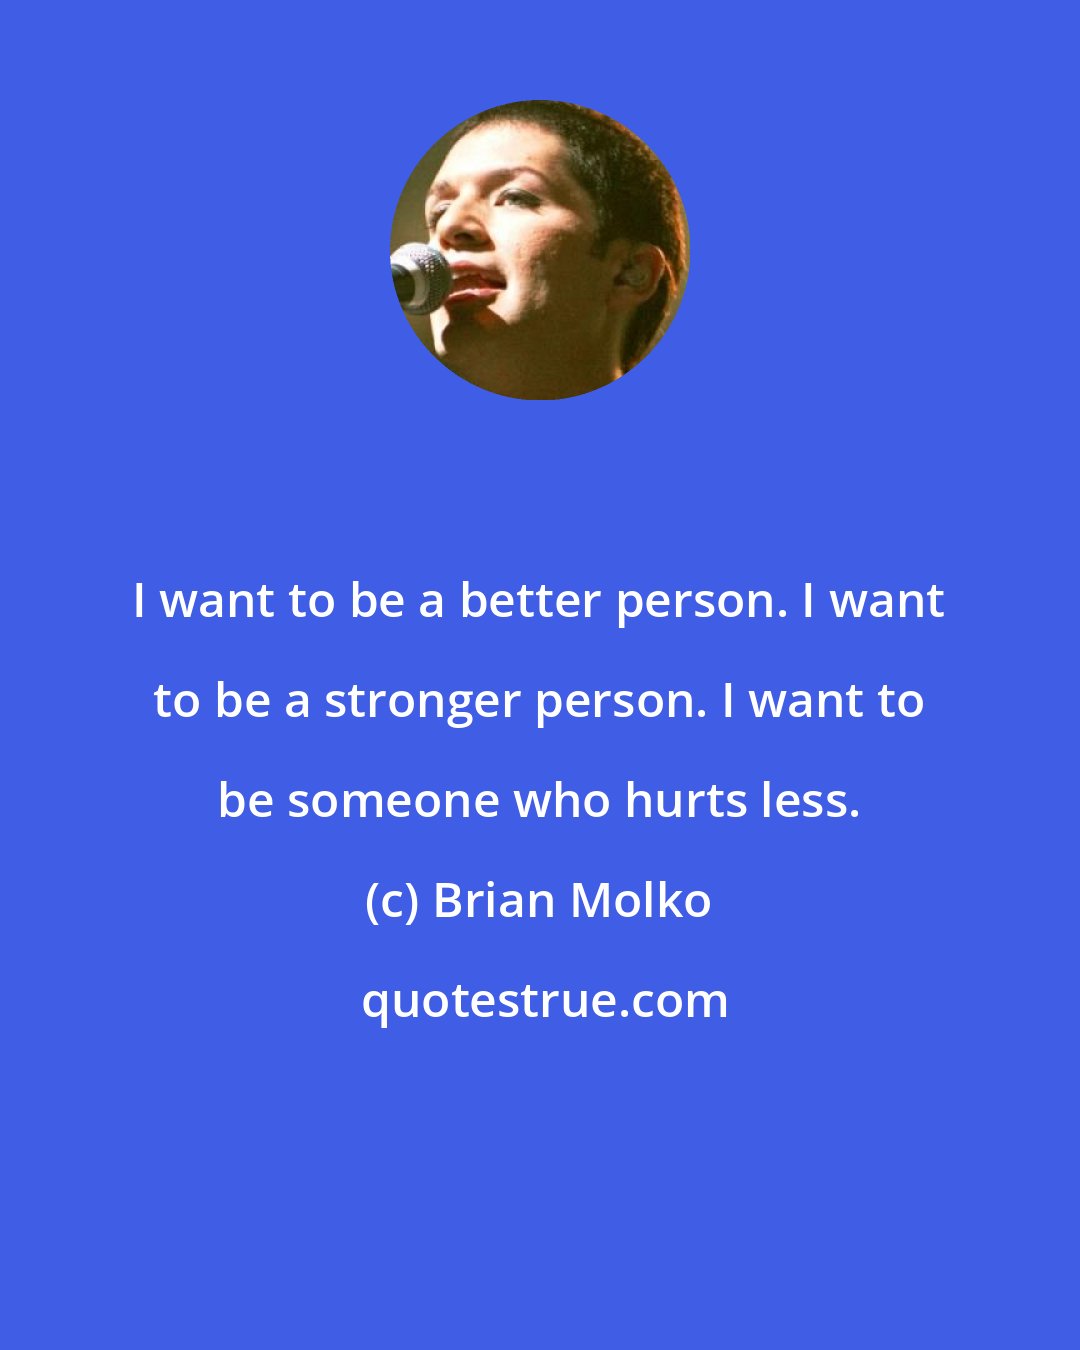 Brian Molko: I want to be a better person. I want to be a stronger person. I want to be someone who hurts less.